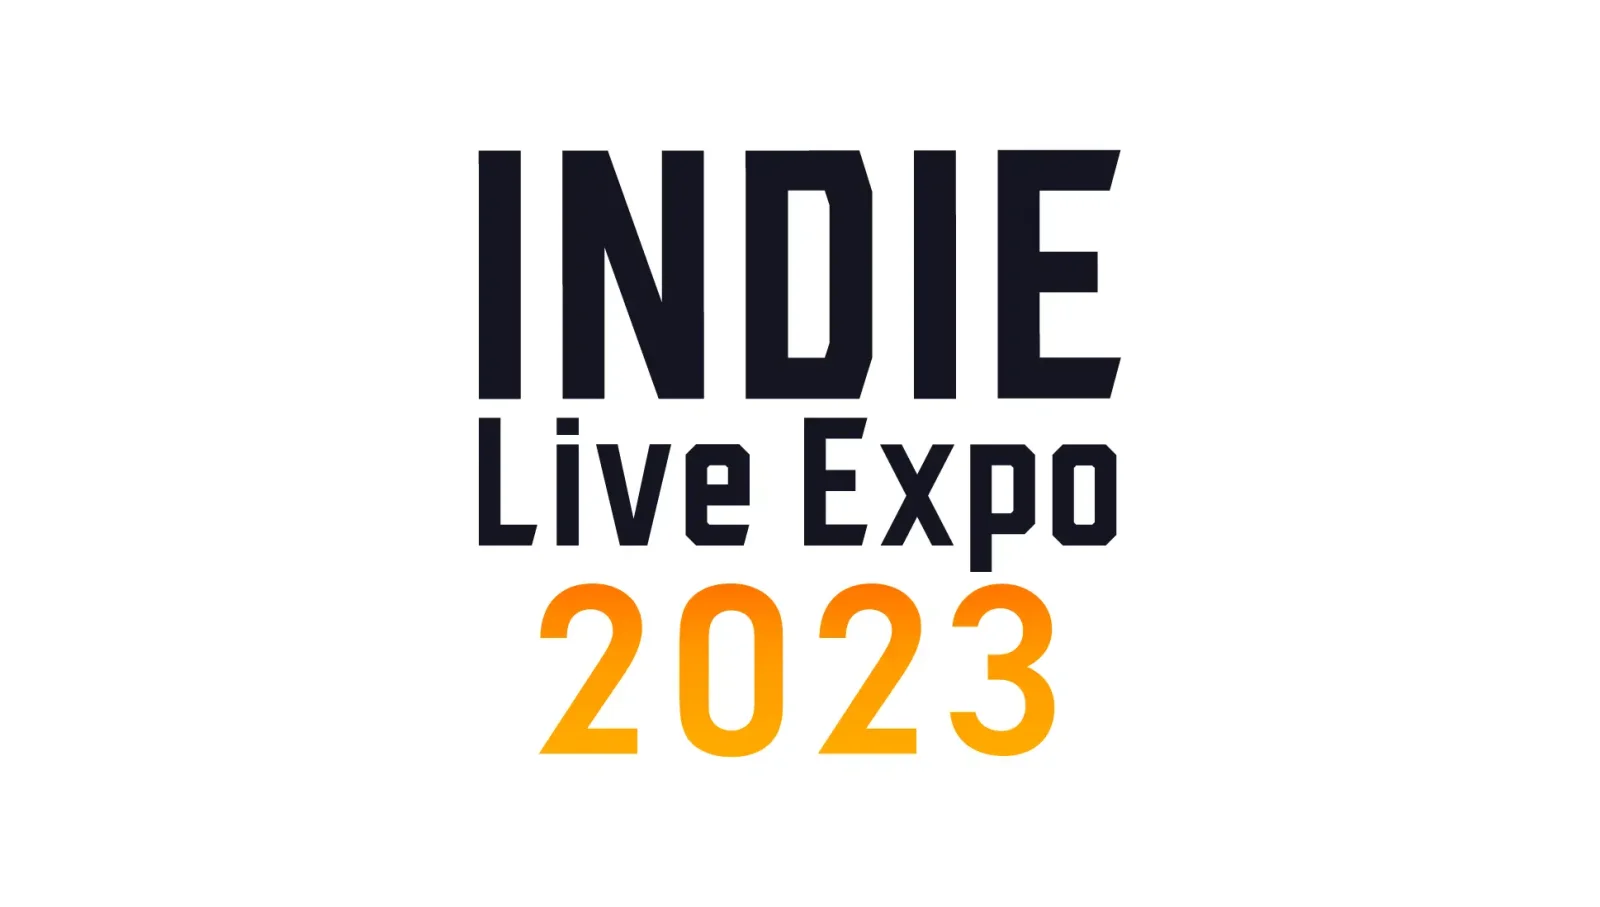 INDIE Live Expo 2023参展节目报名中，2023年5月20日、21日开展